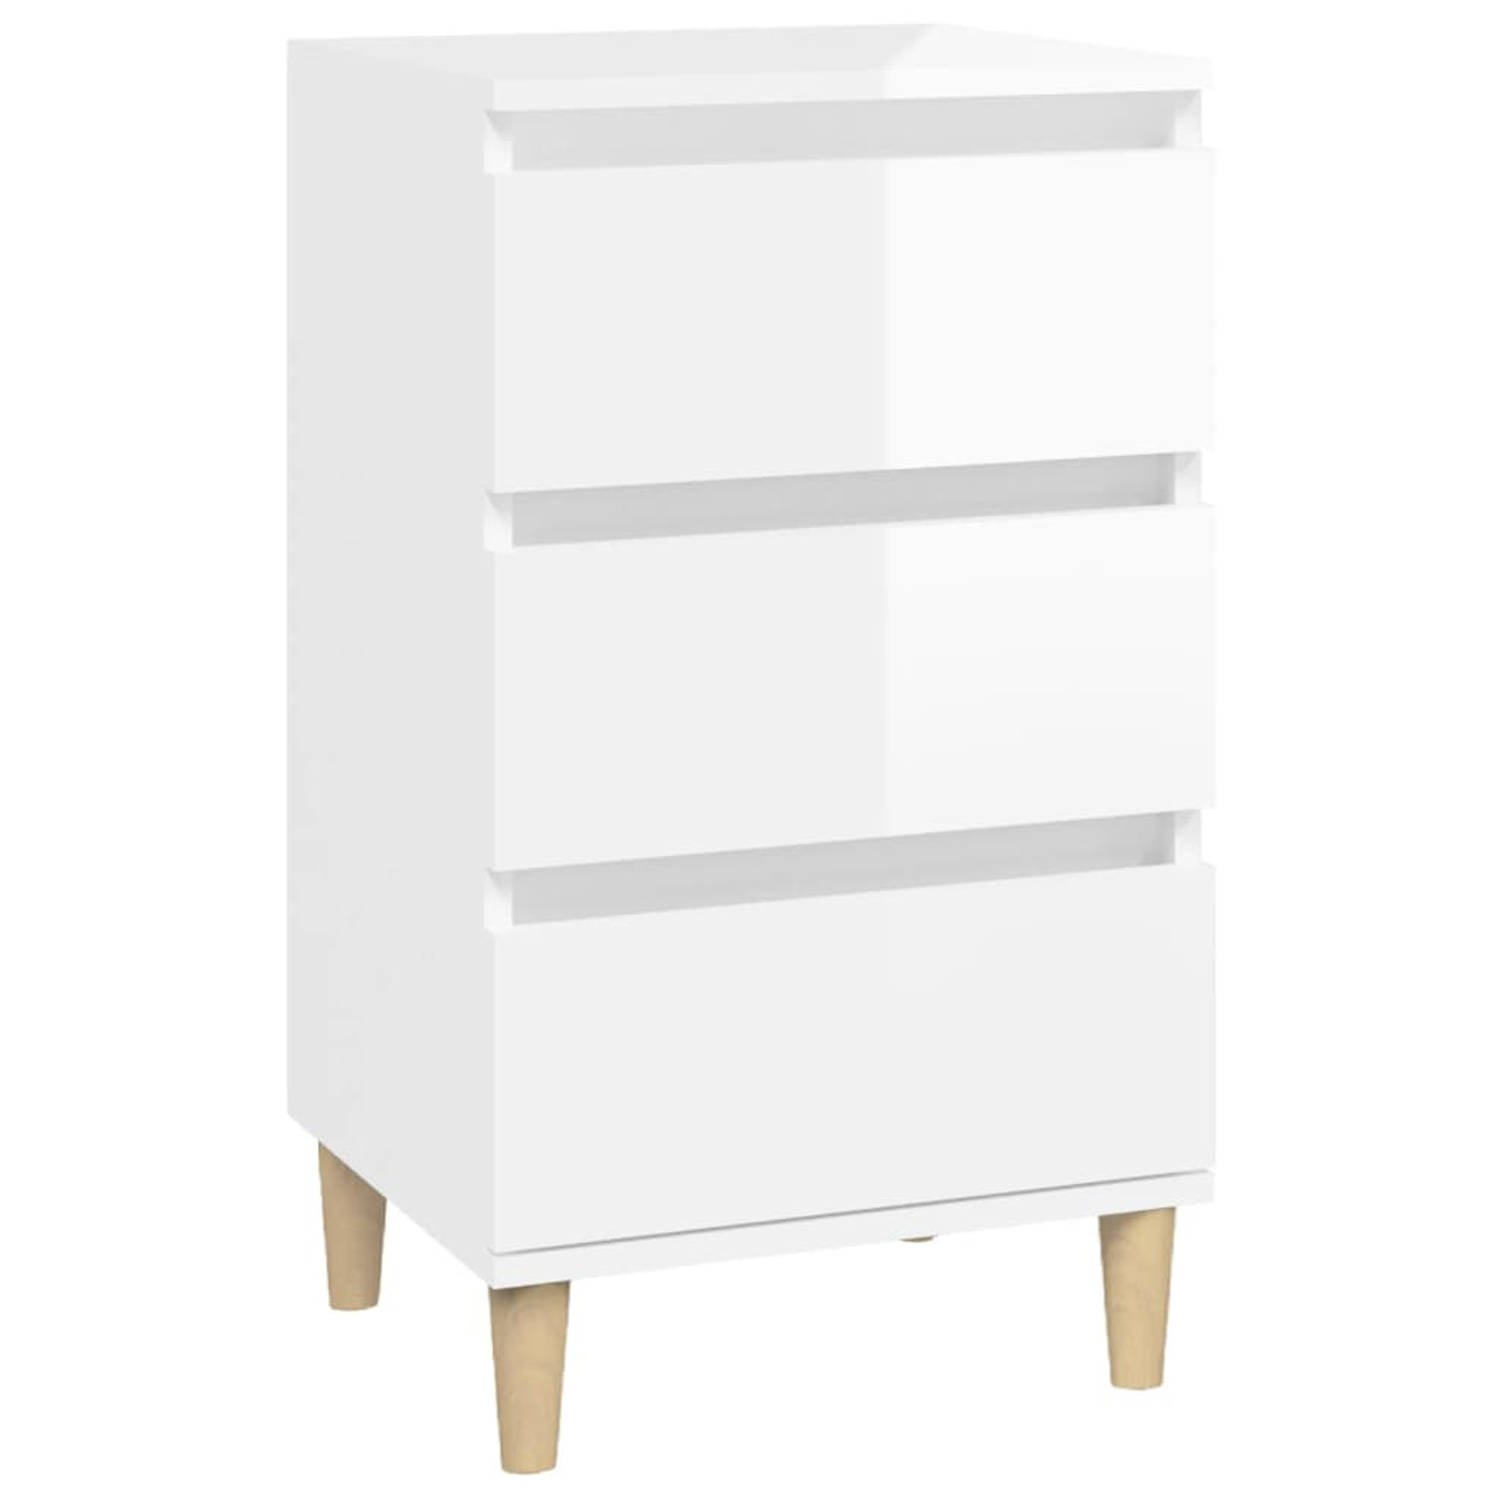 The Living Store Nachtkastje - Hoogglans wit - 40 x 35 x 70 cm - 3 lades